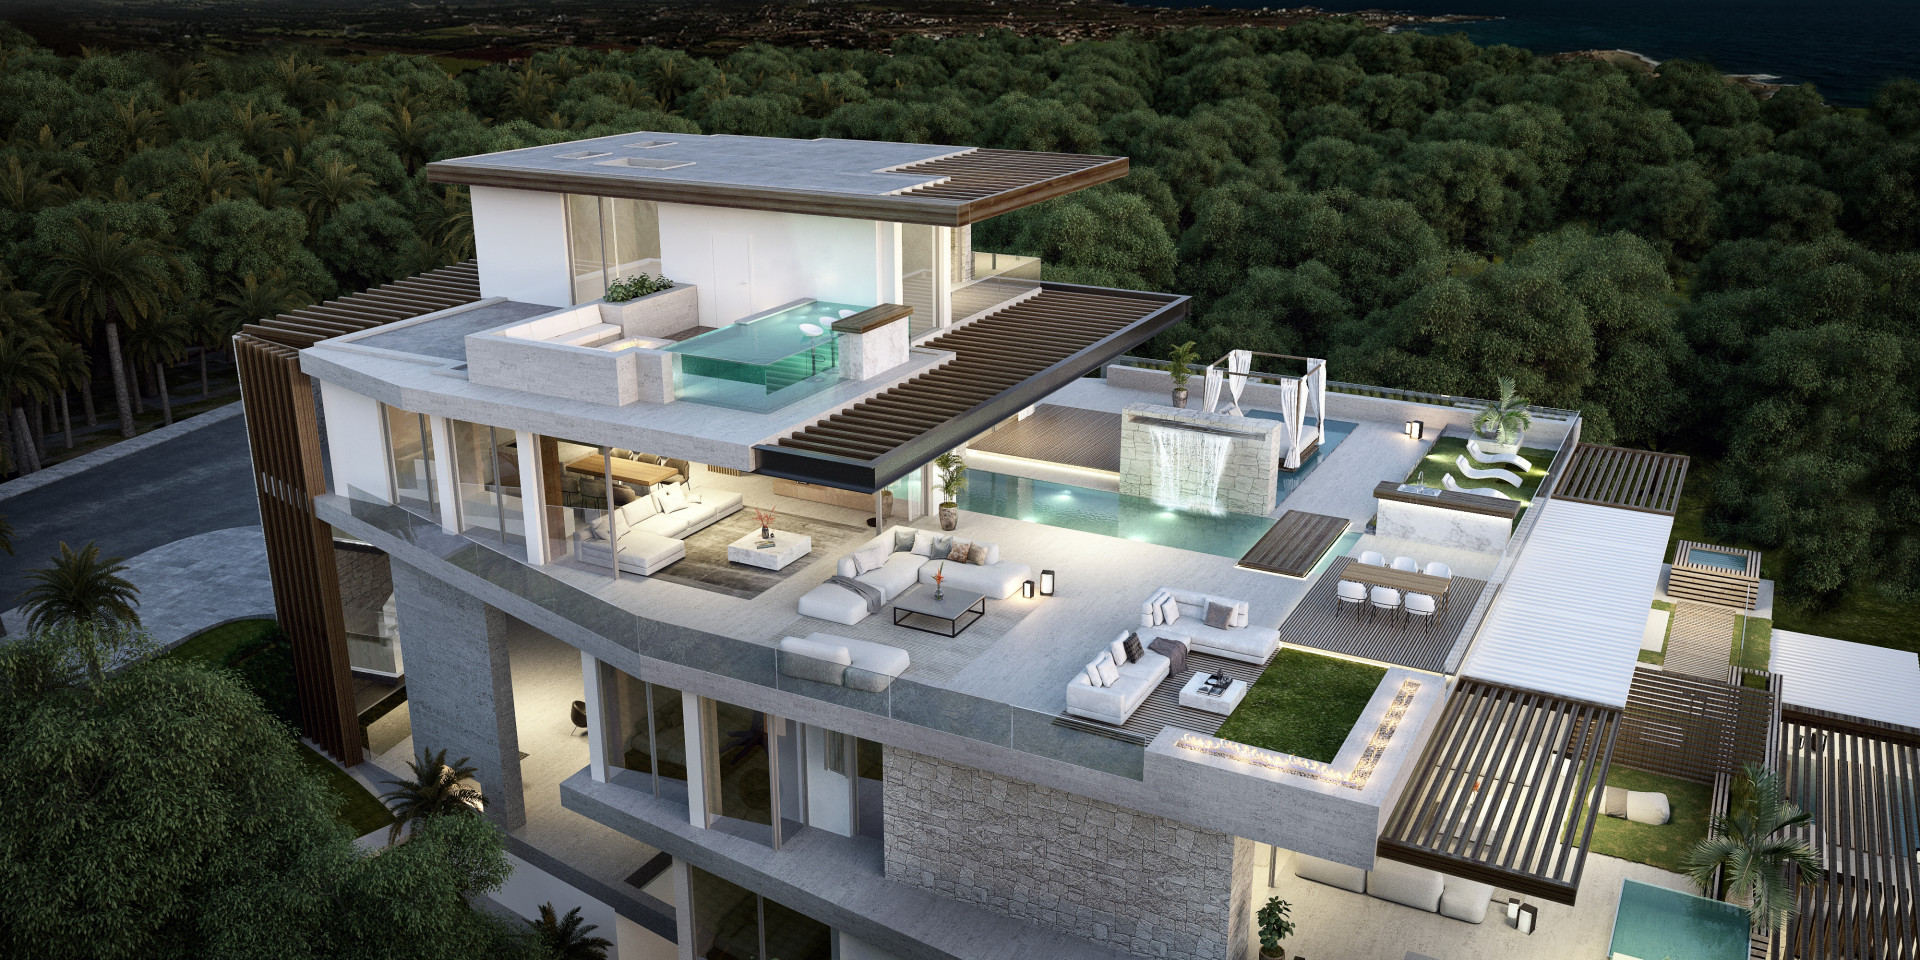 Ikkil Bay: Luxury residential project of nine homes with ocean views in Estepona.